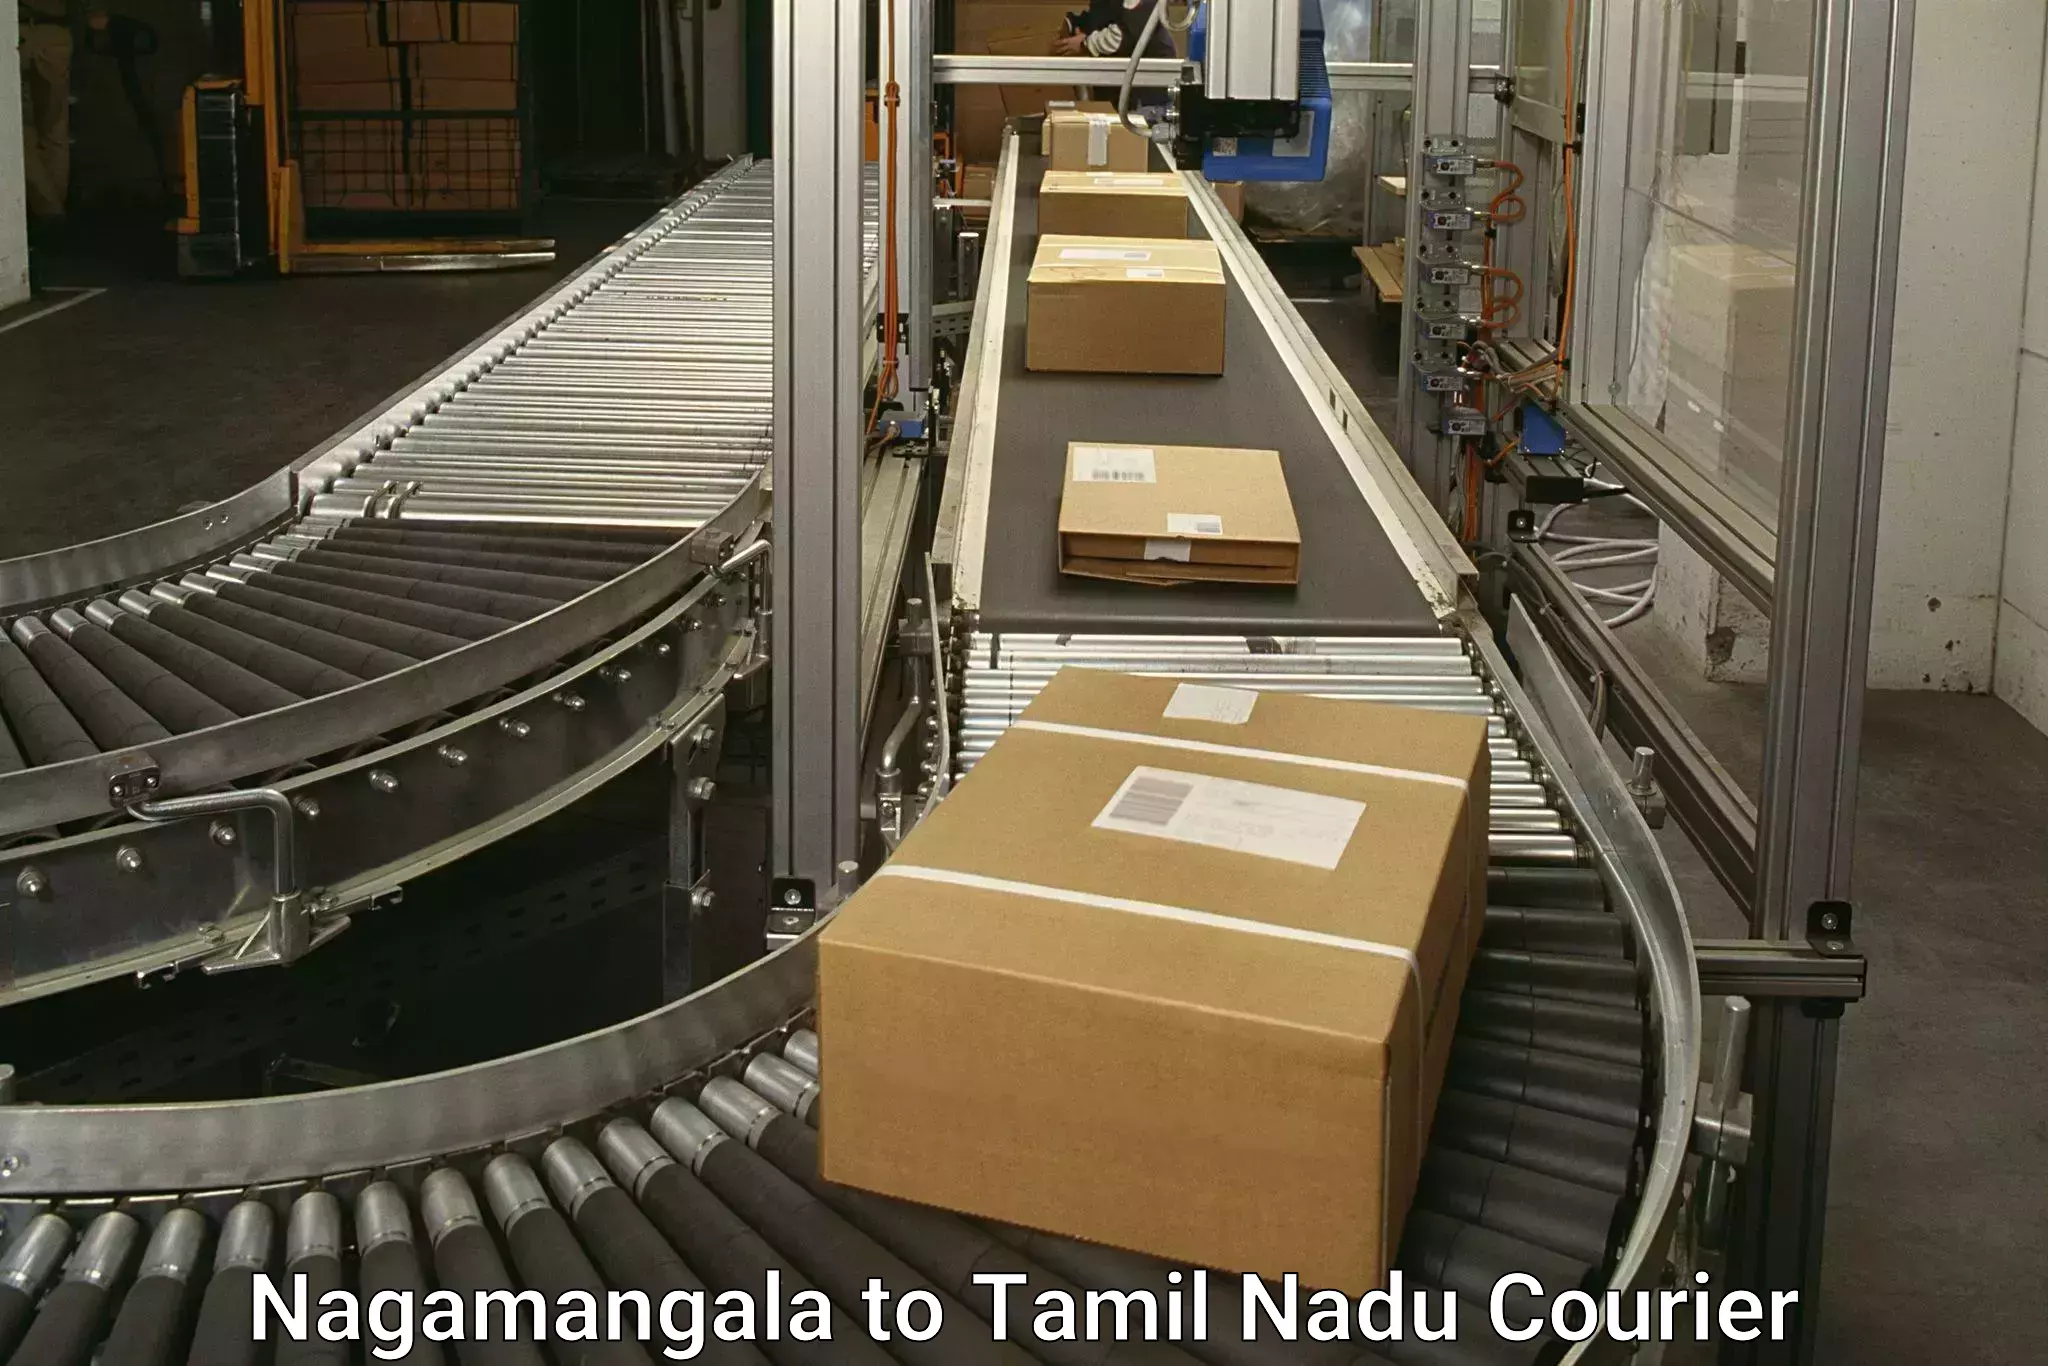 Long distance courier Nagamangala to Ennore Port Chennai